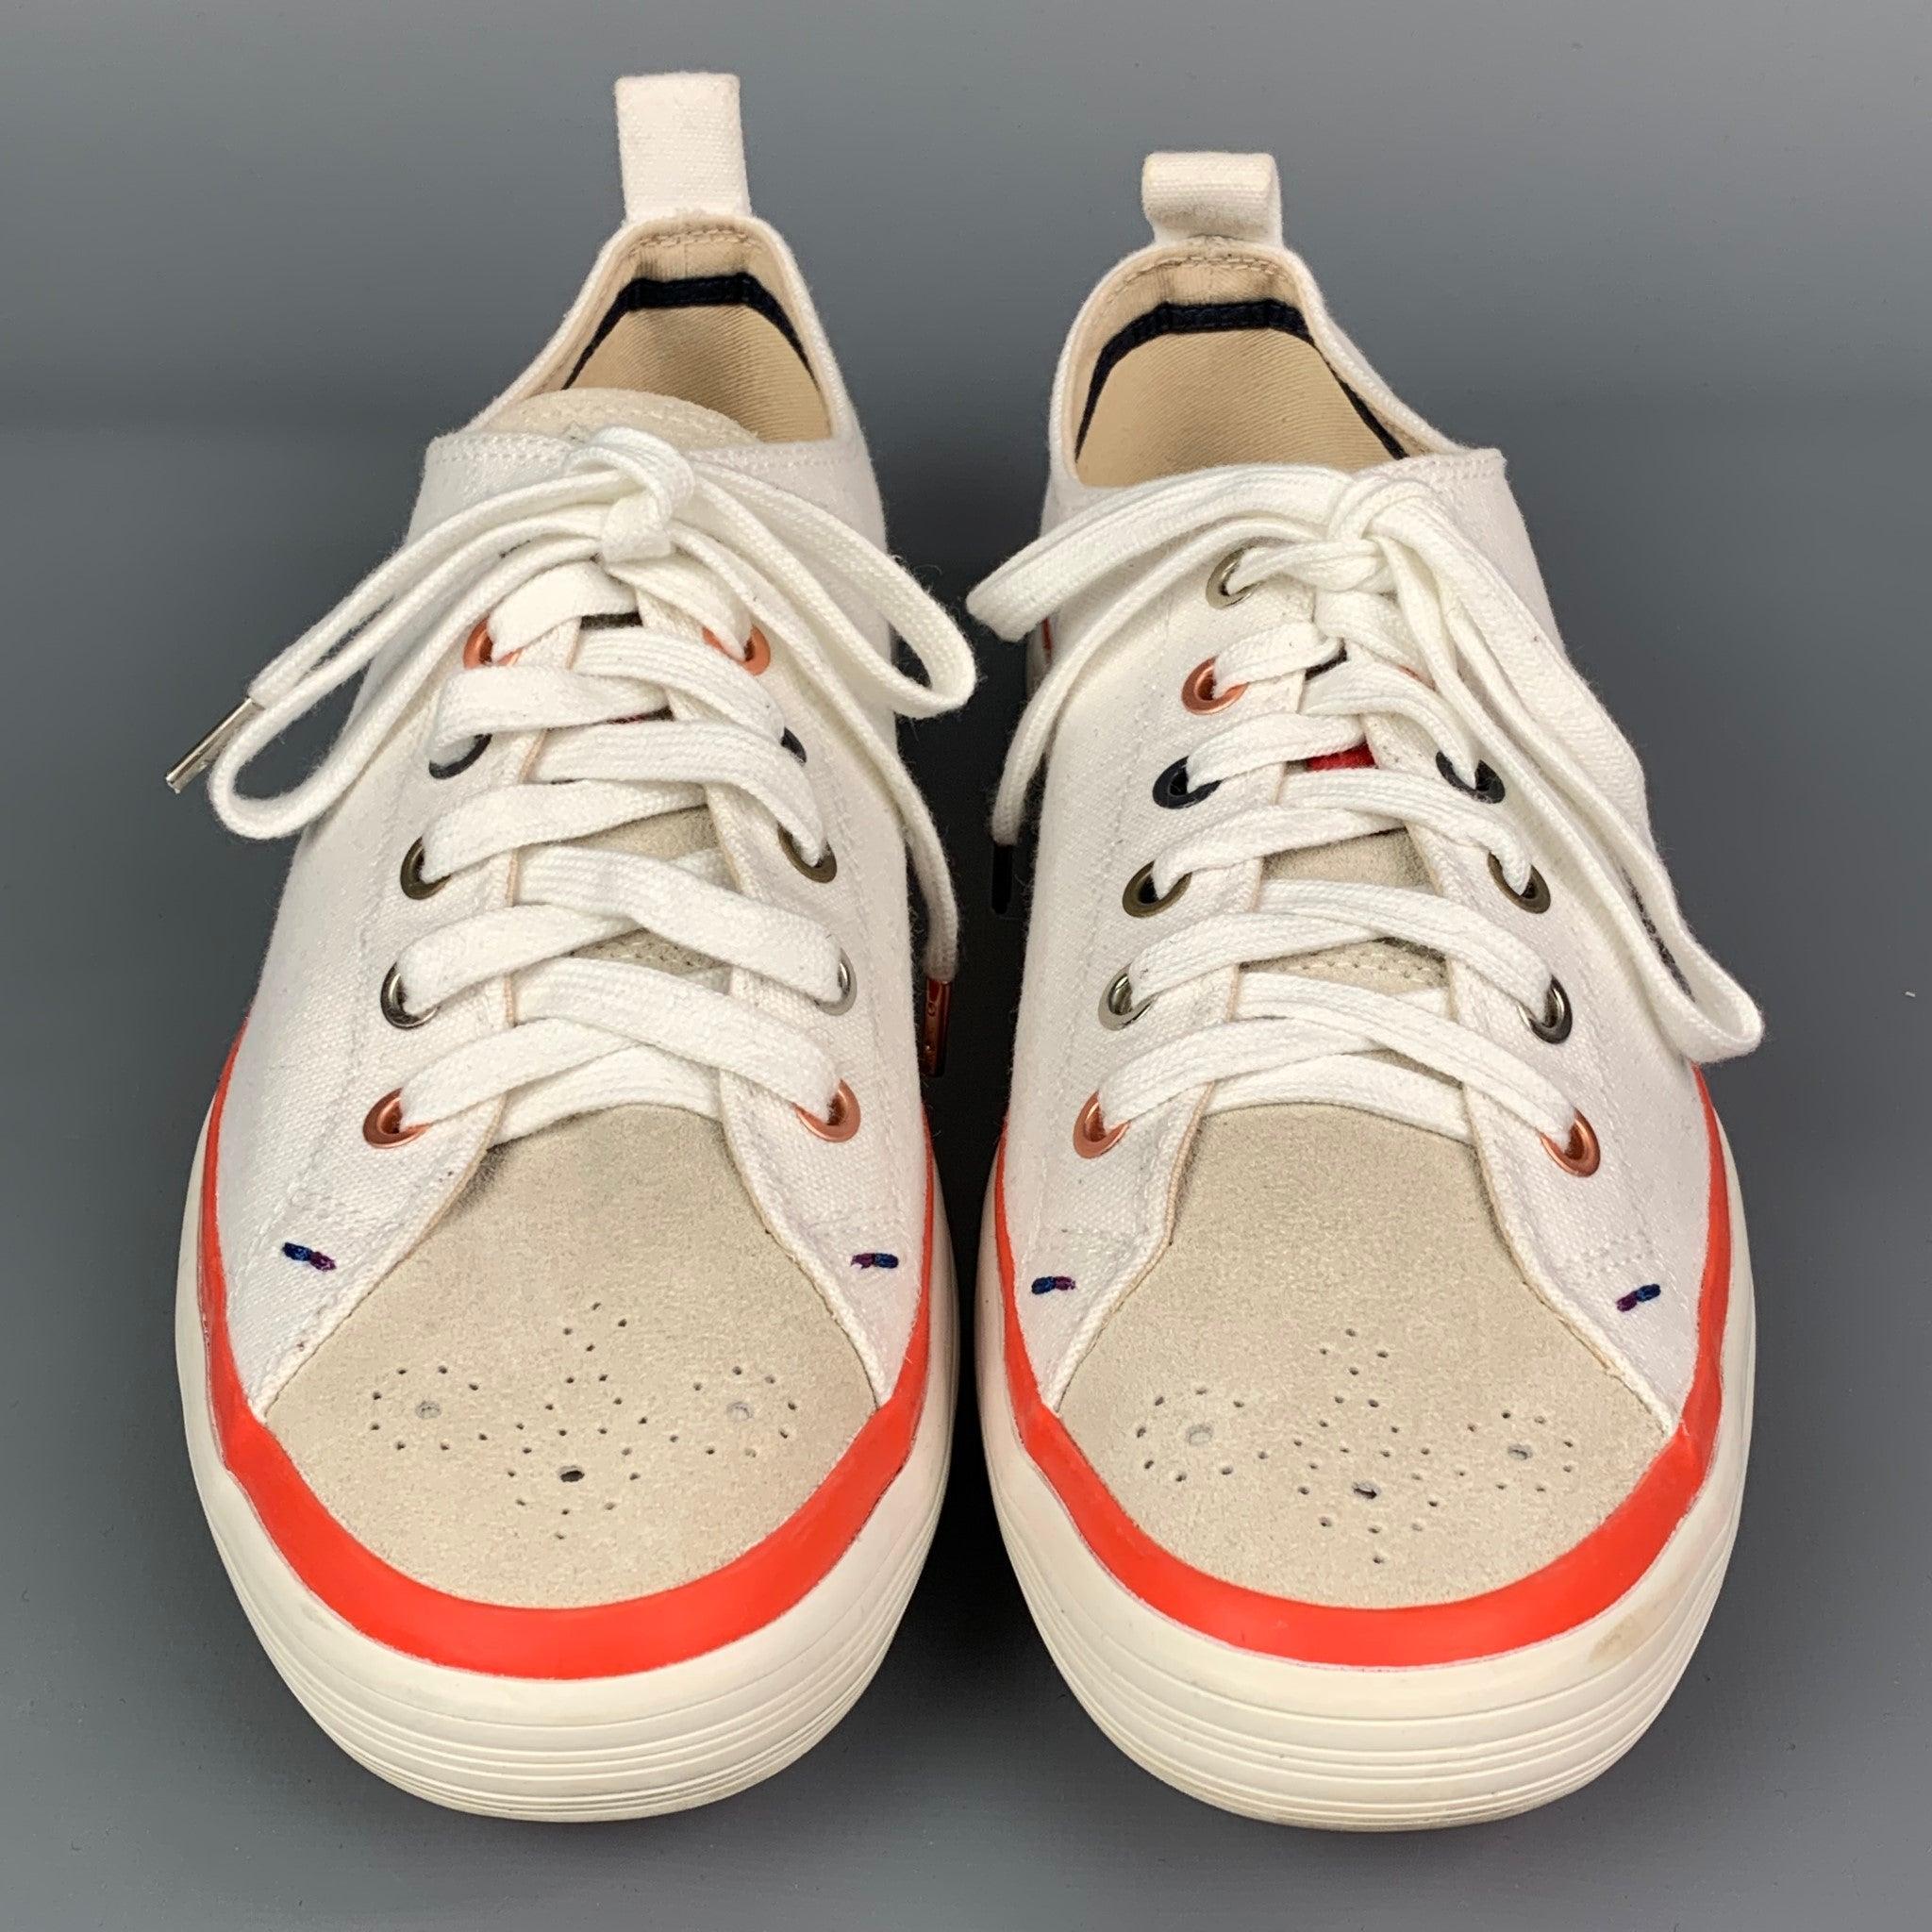 Men's PAUL SMITH Size 7 White Canvas Lace Up Bernard Trainer Sneakers